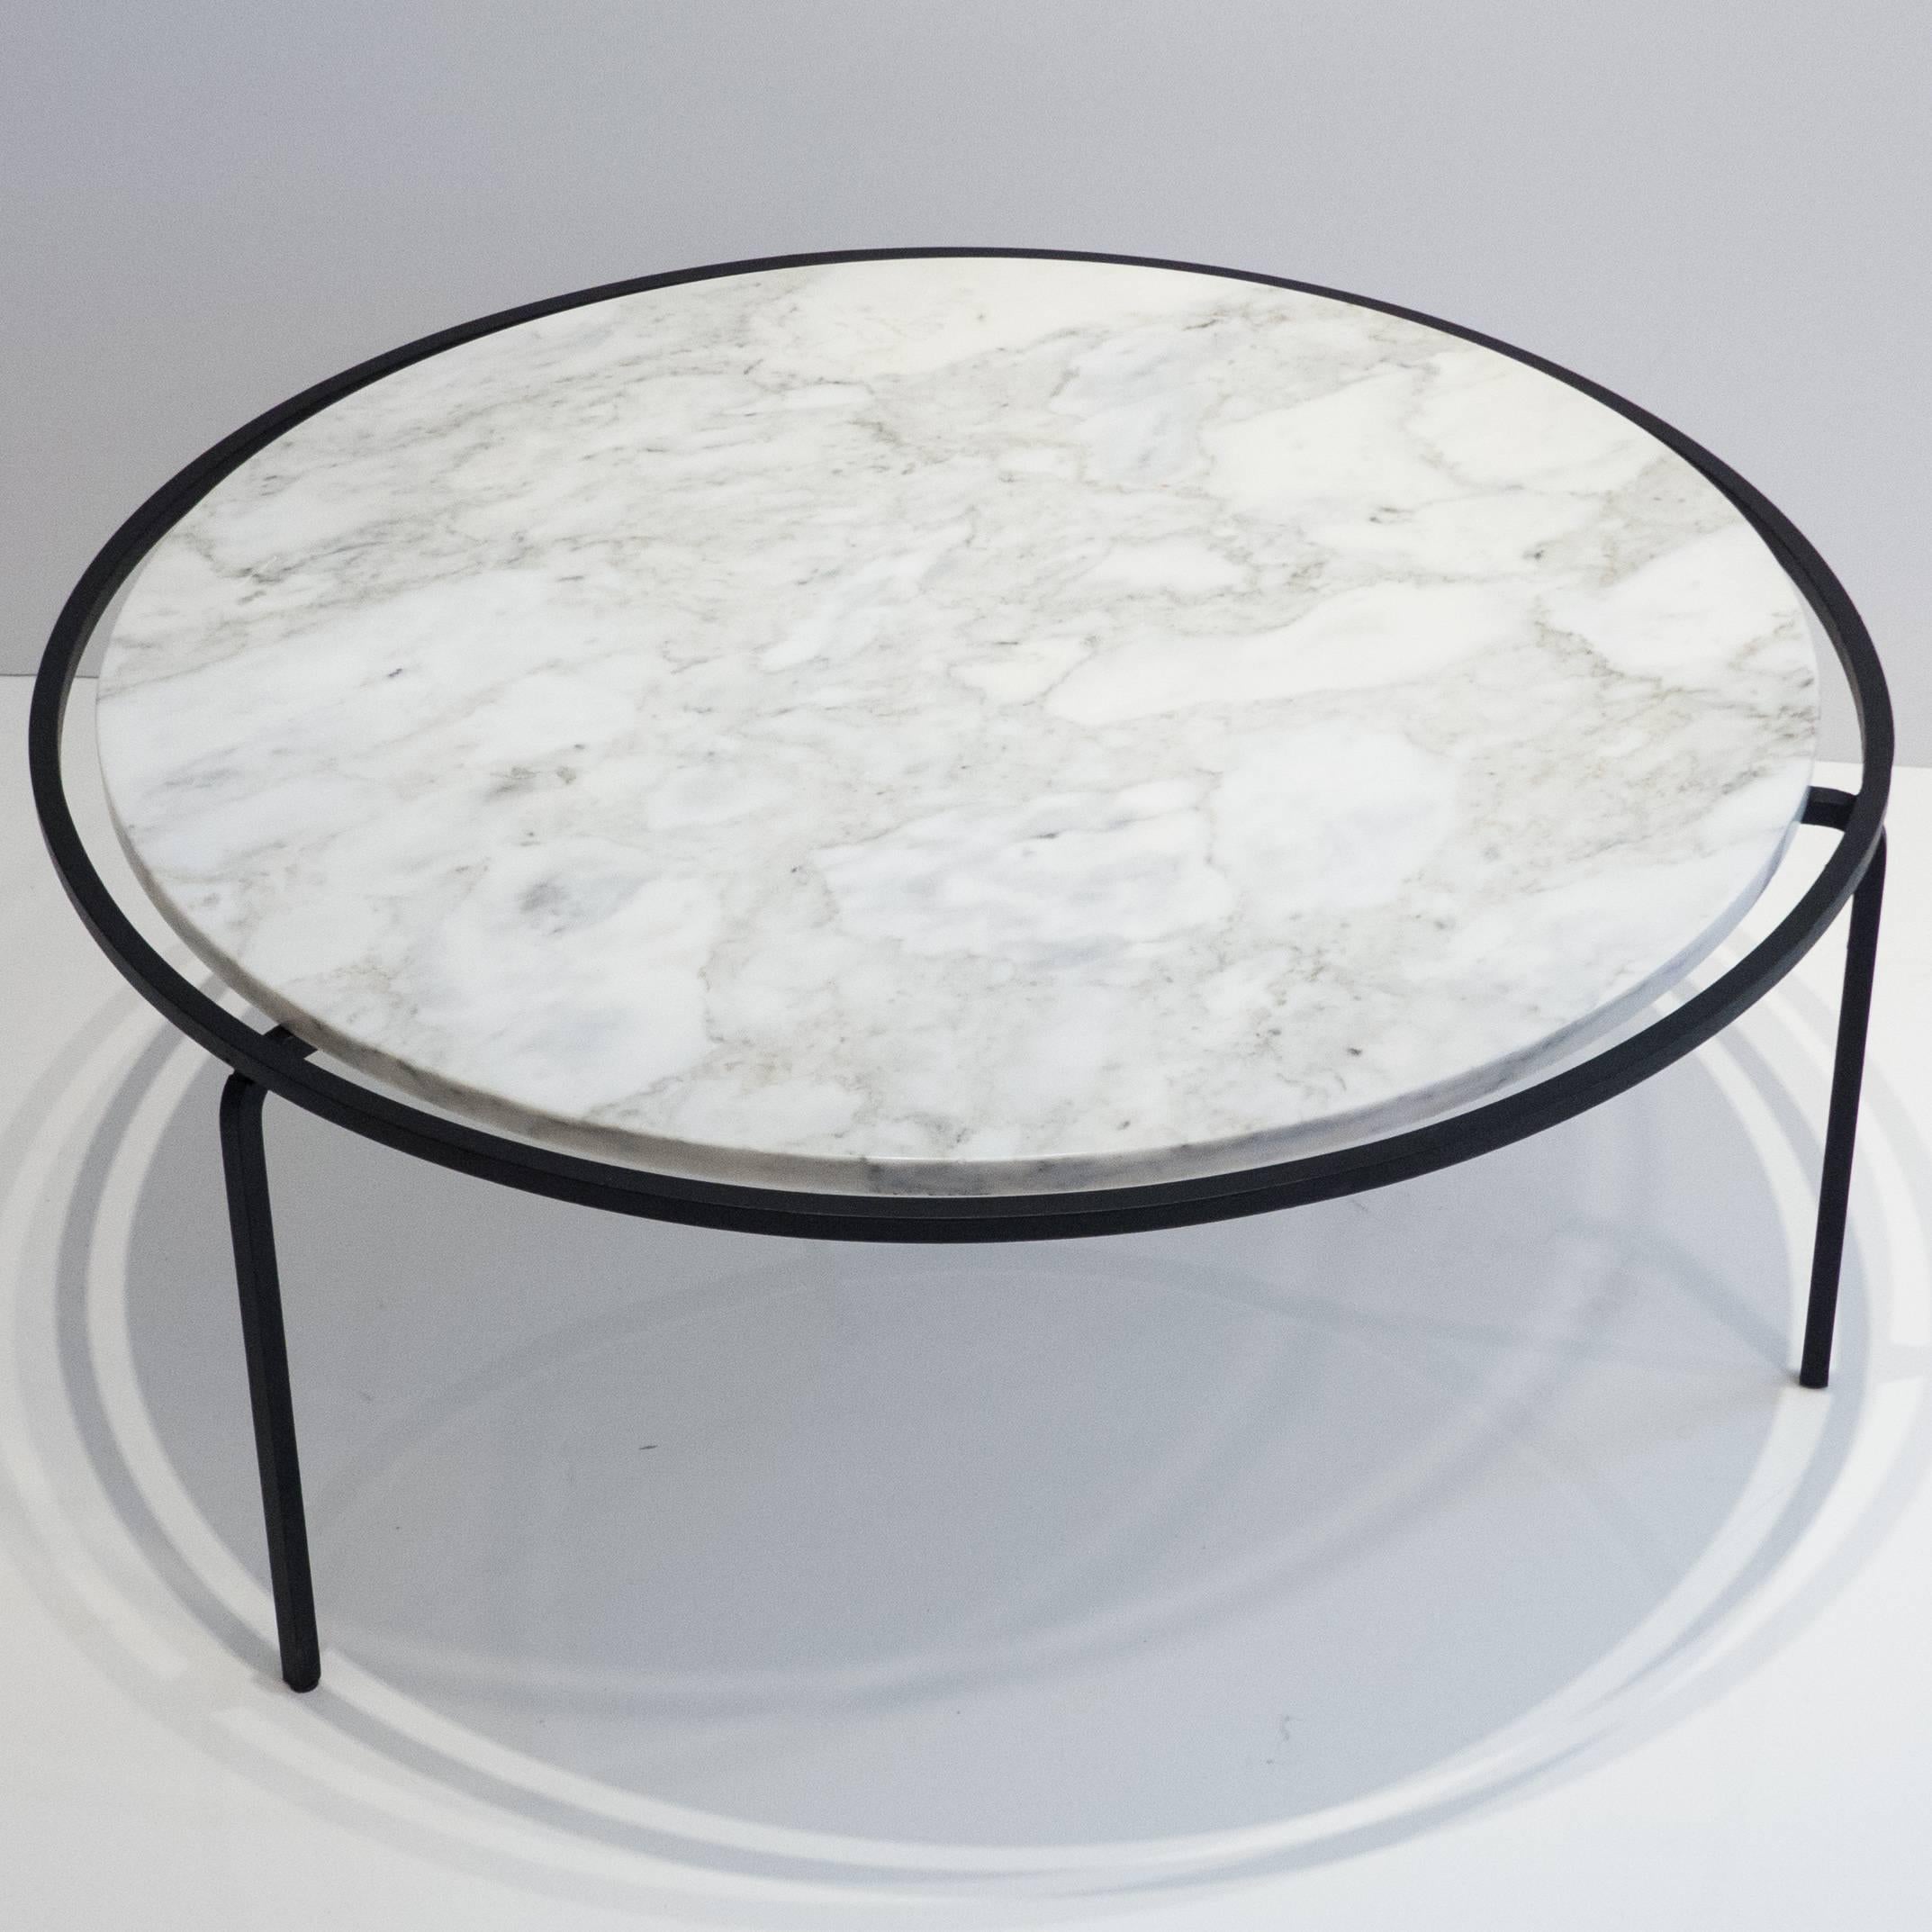 Circular three-leg cocktail table with inset Italian Carrara marble top and black square steel base. A rarely seen design by Allan Gould, produced by Reilly-Wolff Associates of New York City, circa 1952. The floating top was also offered in glass,